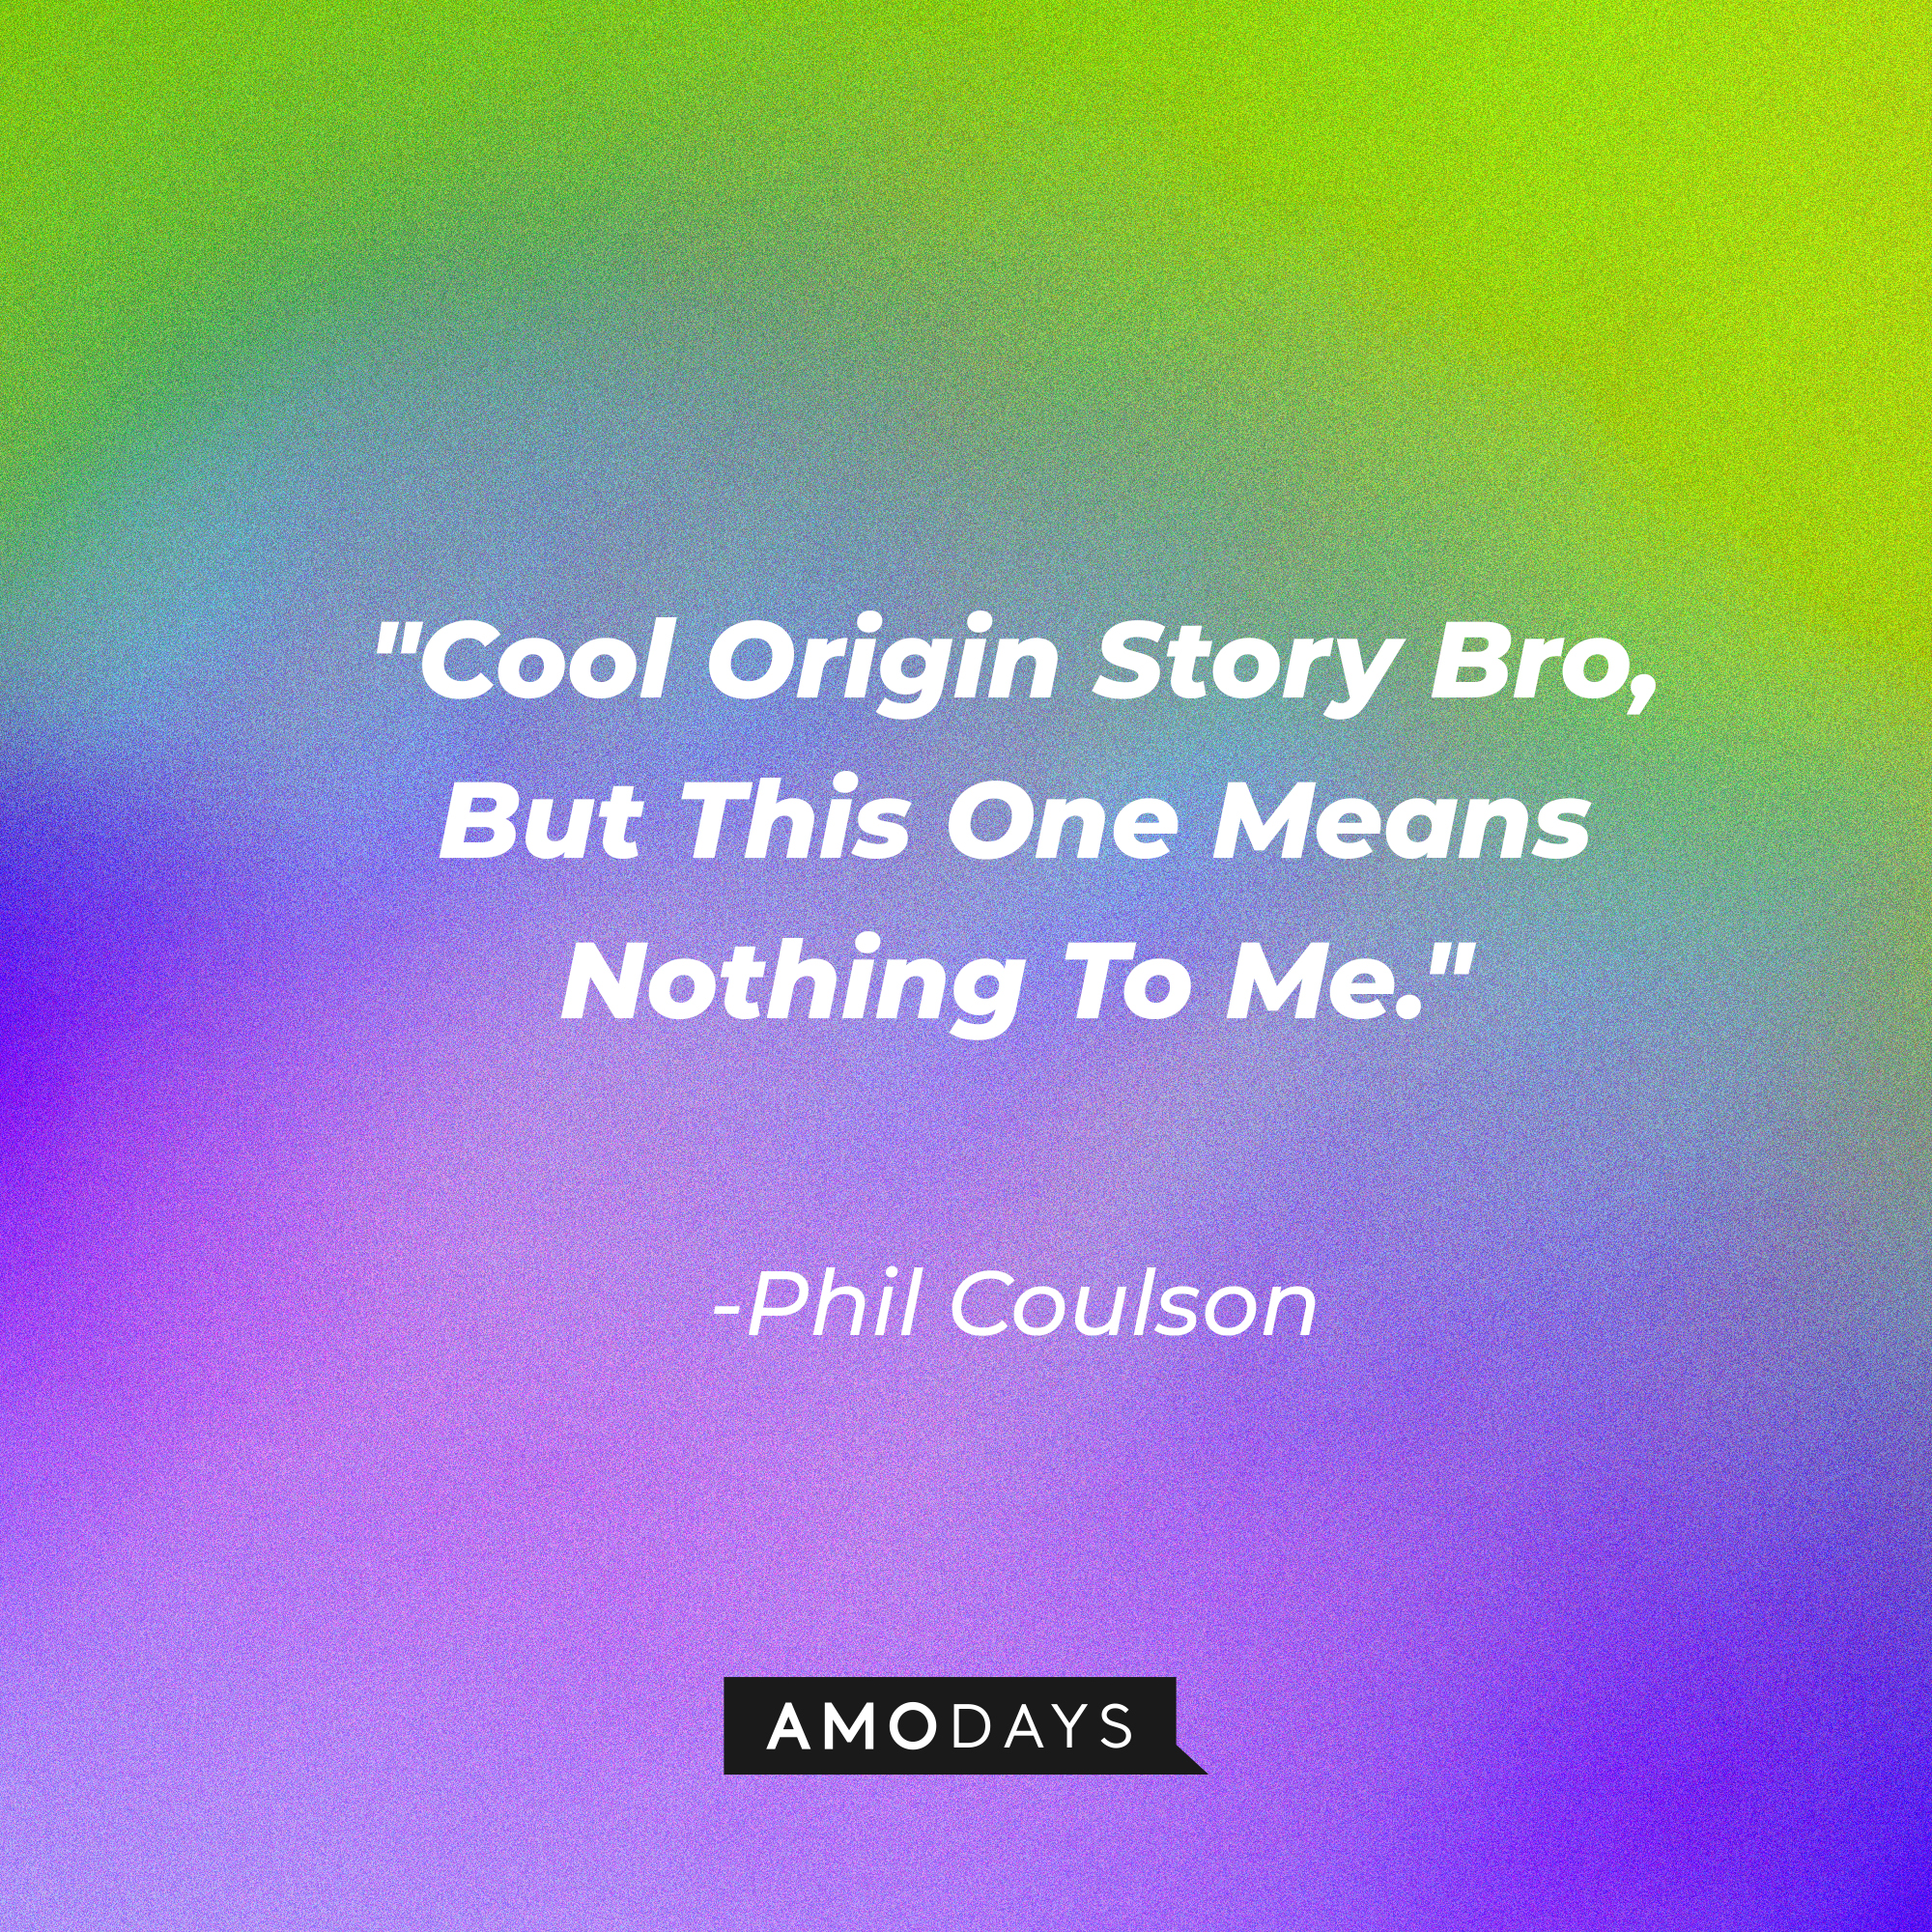 Phil Coulson's quote: "Cool Origin Story Bro, But This One Means Nothing To Me." | Source: Amodays